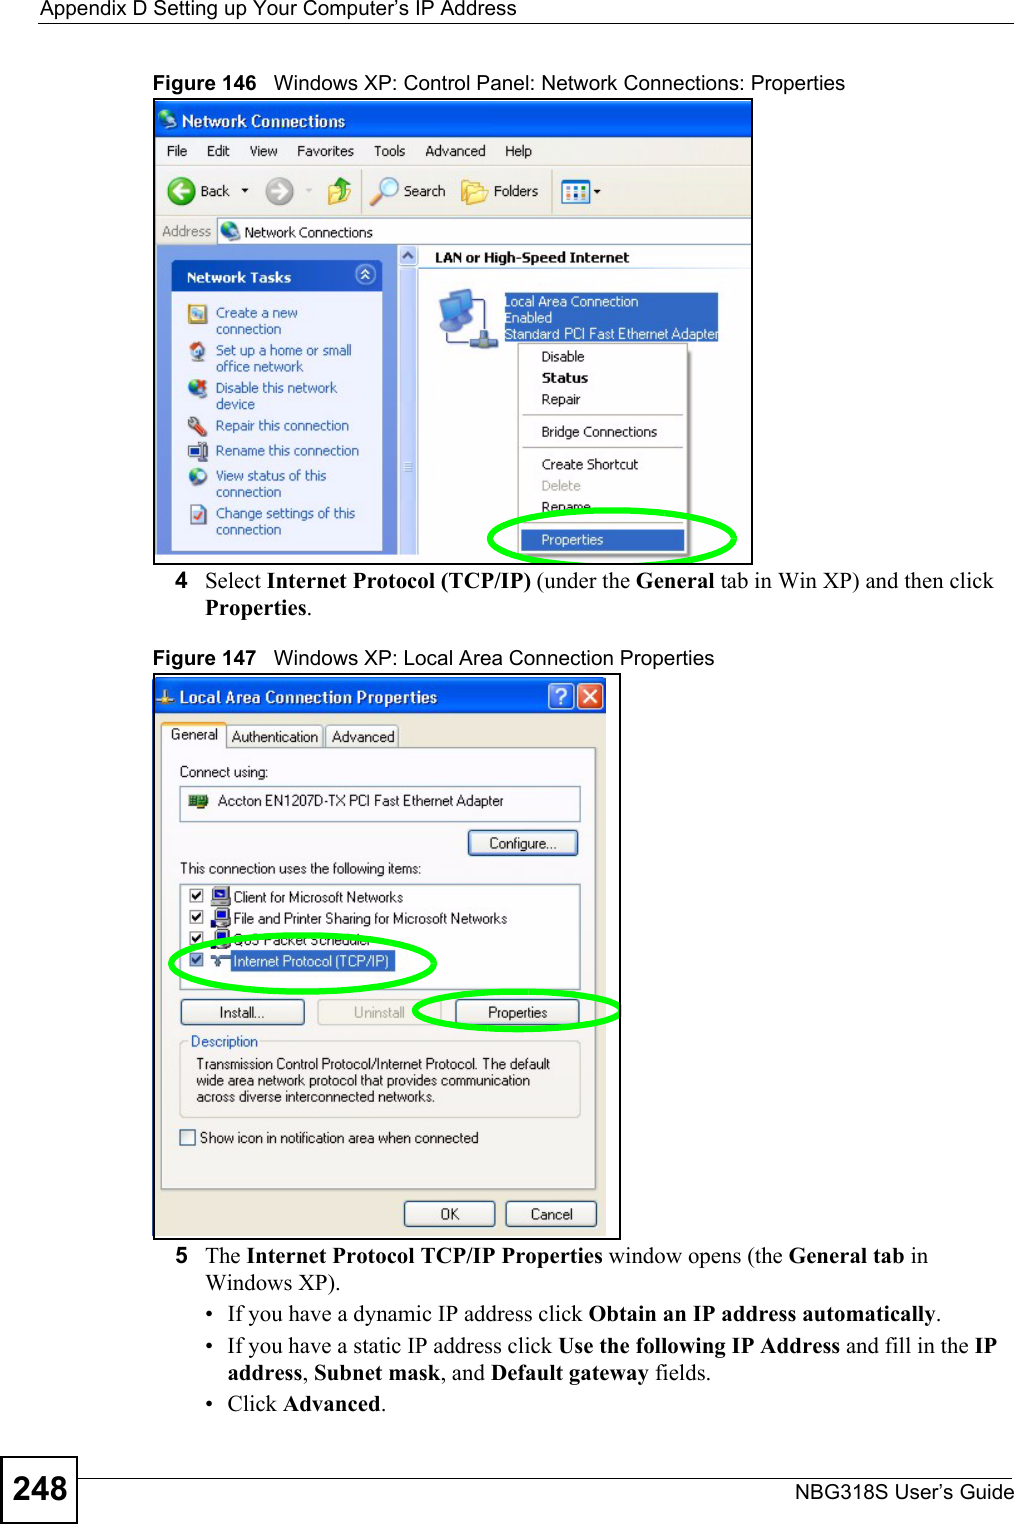 Appendix D Setting up Your Computer’s IP AddressNBG318S User’s Guide248Figure 146   Windows XP: Control Panel: Network Connections: Properties4Select Internet Protocol (TCP/IP) (under the General tab in Win XP) and then click Properties.Figure 147   Windows XP: Local Area Connection Properties5The Internet Protocol TCP/IP Properties window opens (the General tab in Windows XP).• If you have a dynamic IP address click Obtain an IP address automatically.• If you have a static IP address click Use the following IP Address and fill in the IP address, Subnet mask, and Default gateway fields. • Click Advanced.